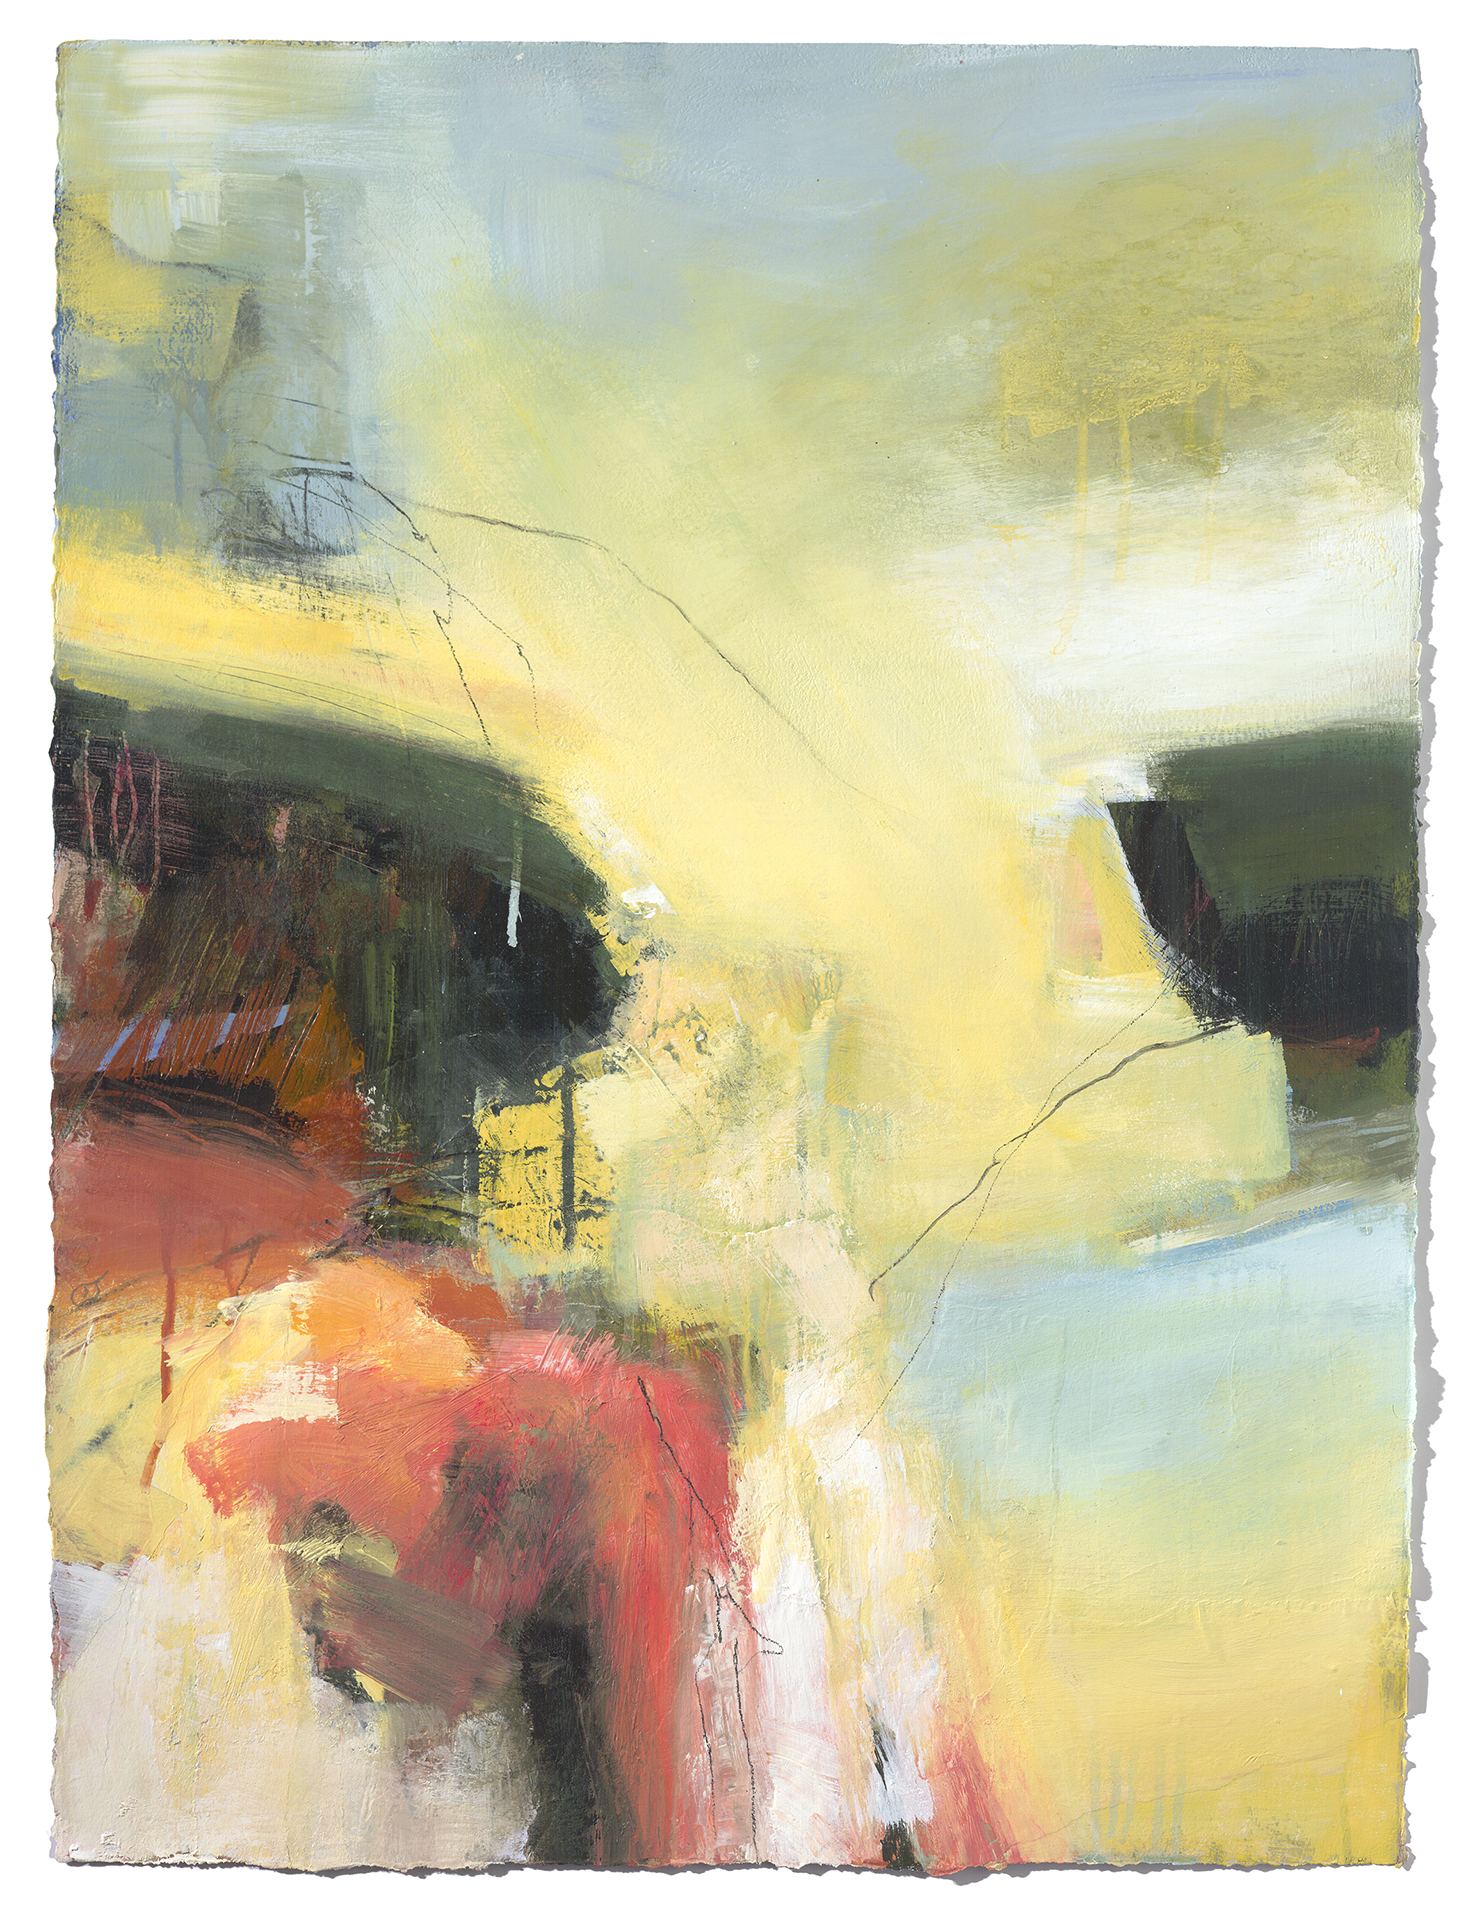 Carol Jenkins' abstract landscape is painted in yellows and warm reds, with a pale blue background.